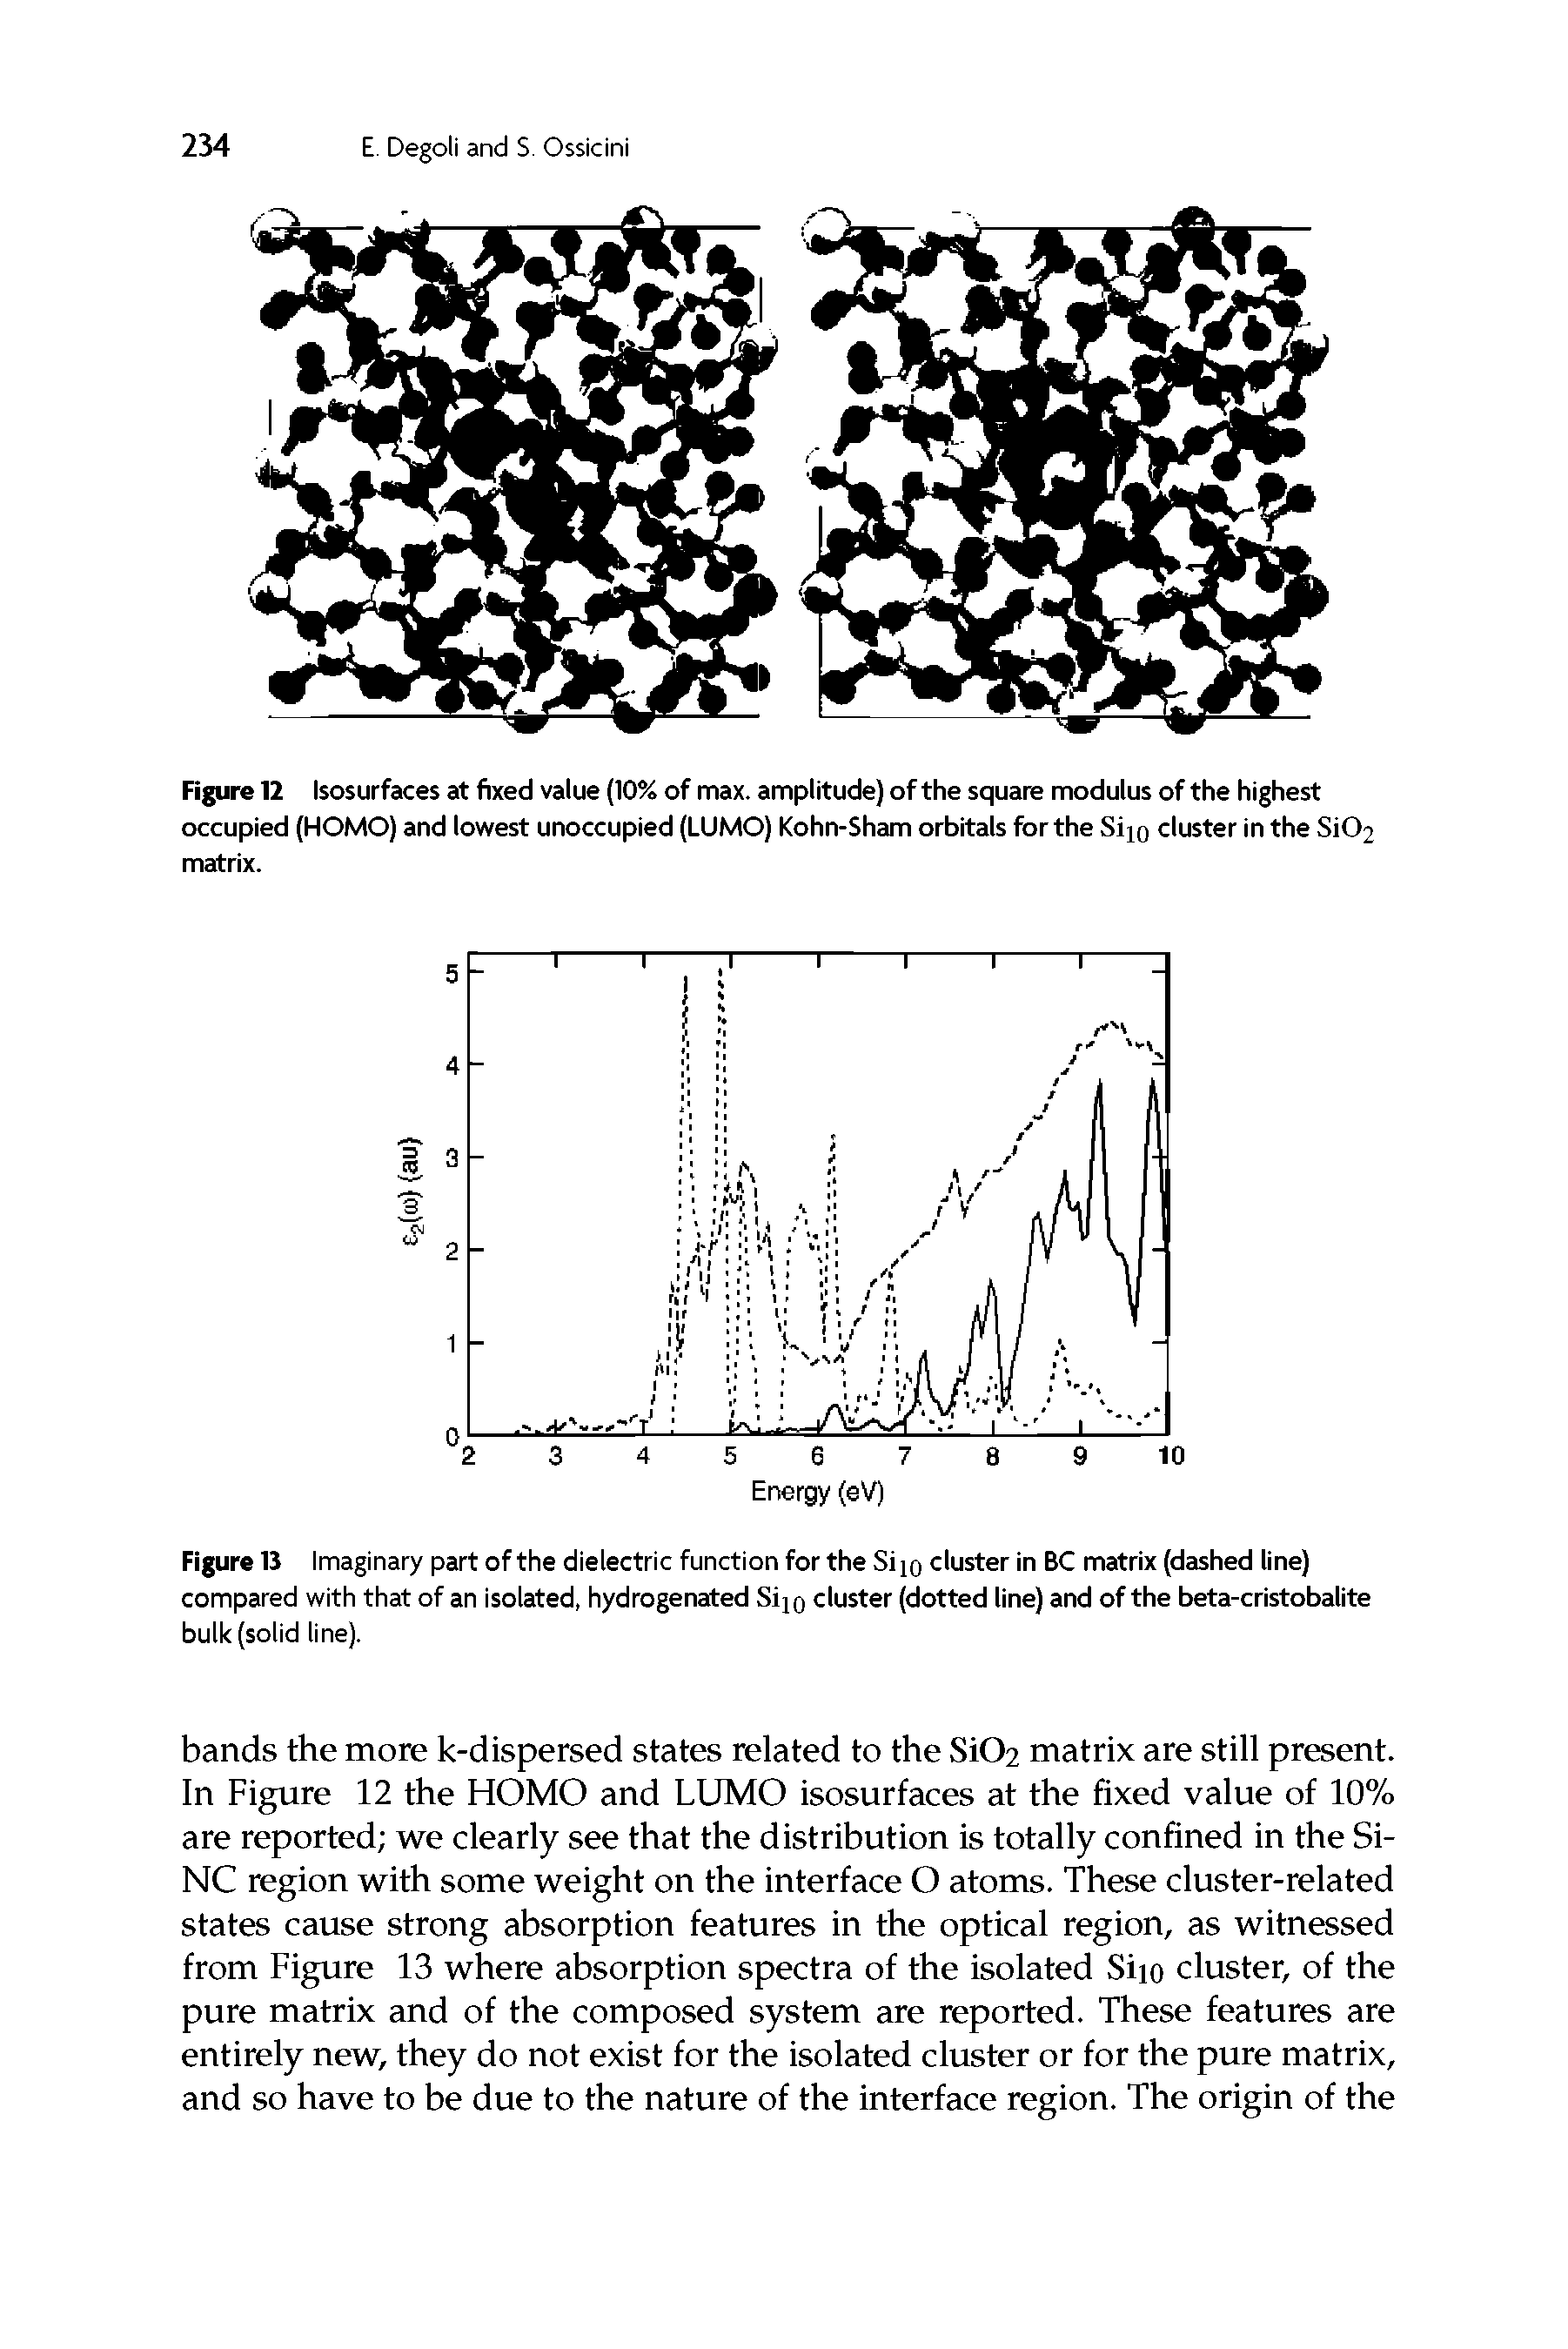 Figure 12 Isosurfaces at fixed value (10% of max. amplitude) of the square modulus of the highest occupied (HOMO) and lowest unoccupied (LUMO) Kohn-Sham orbitals for the Si m cluster in the Si02 matrix.